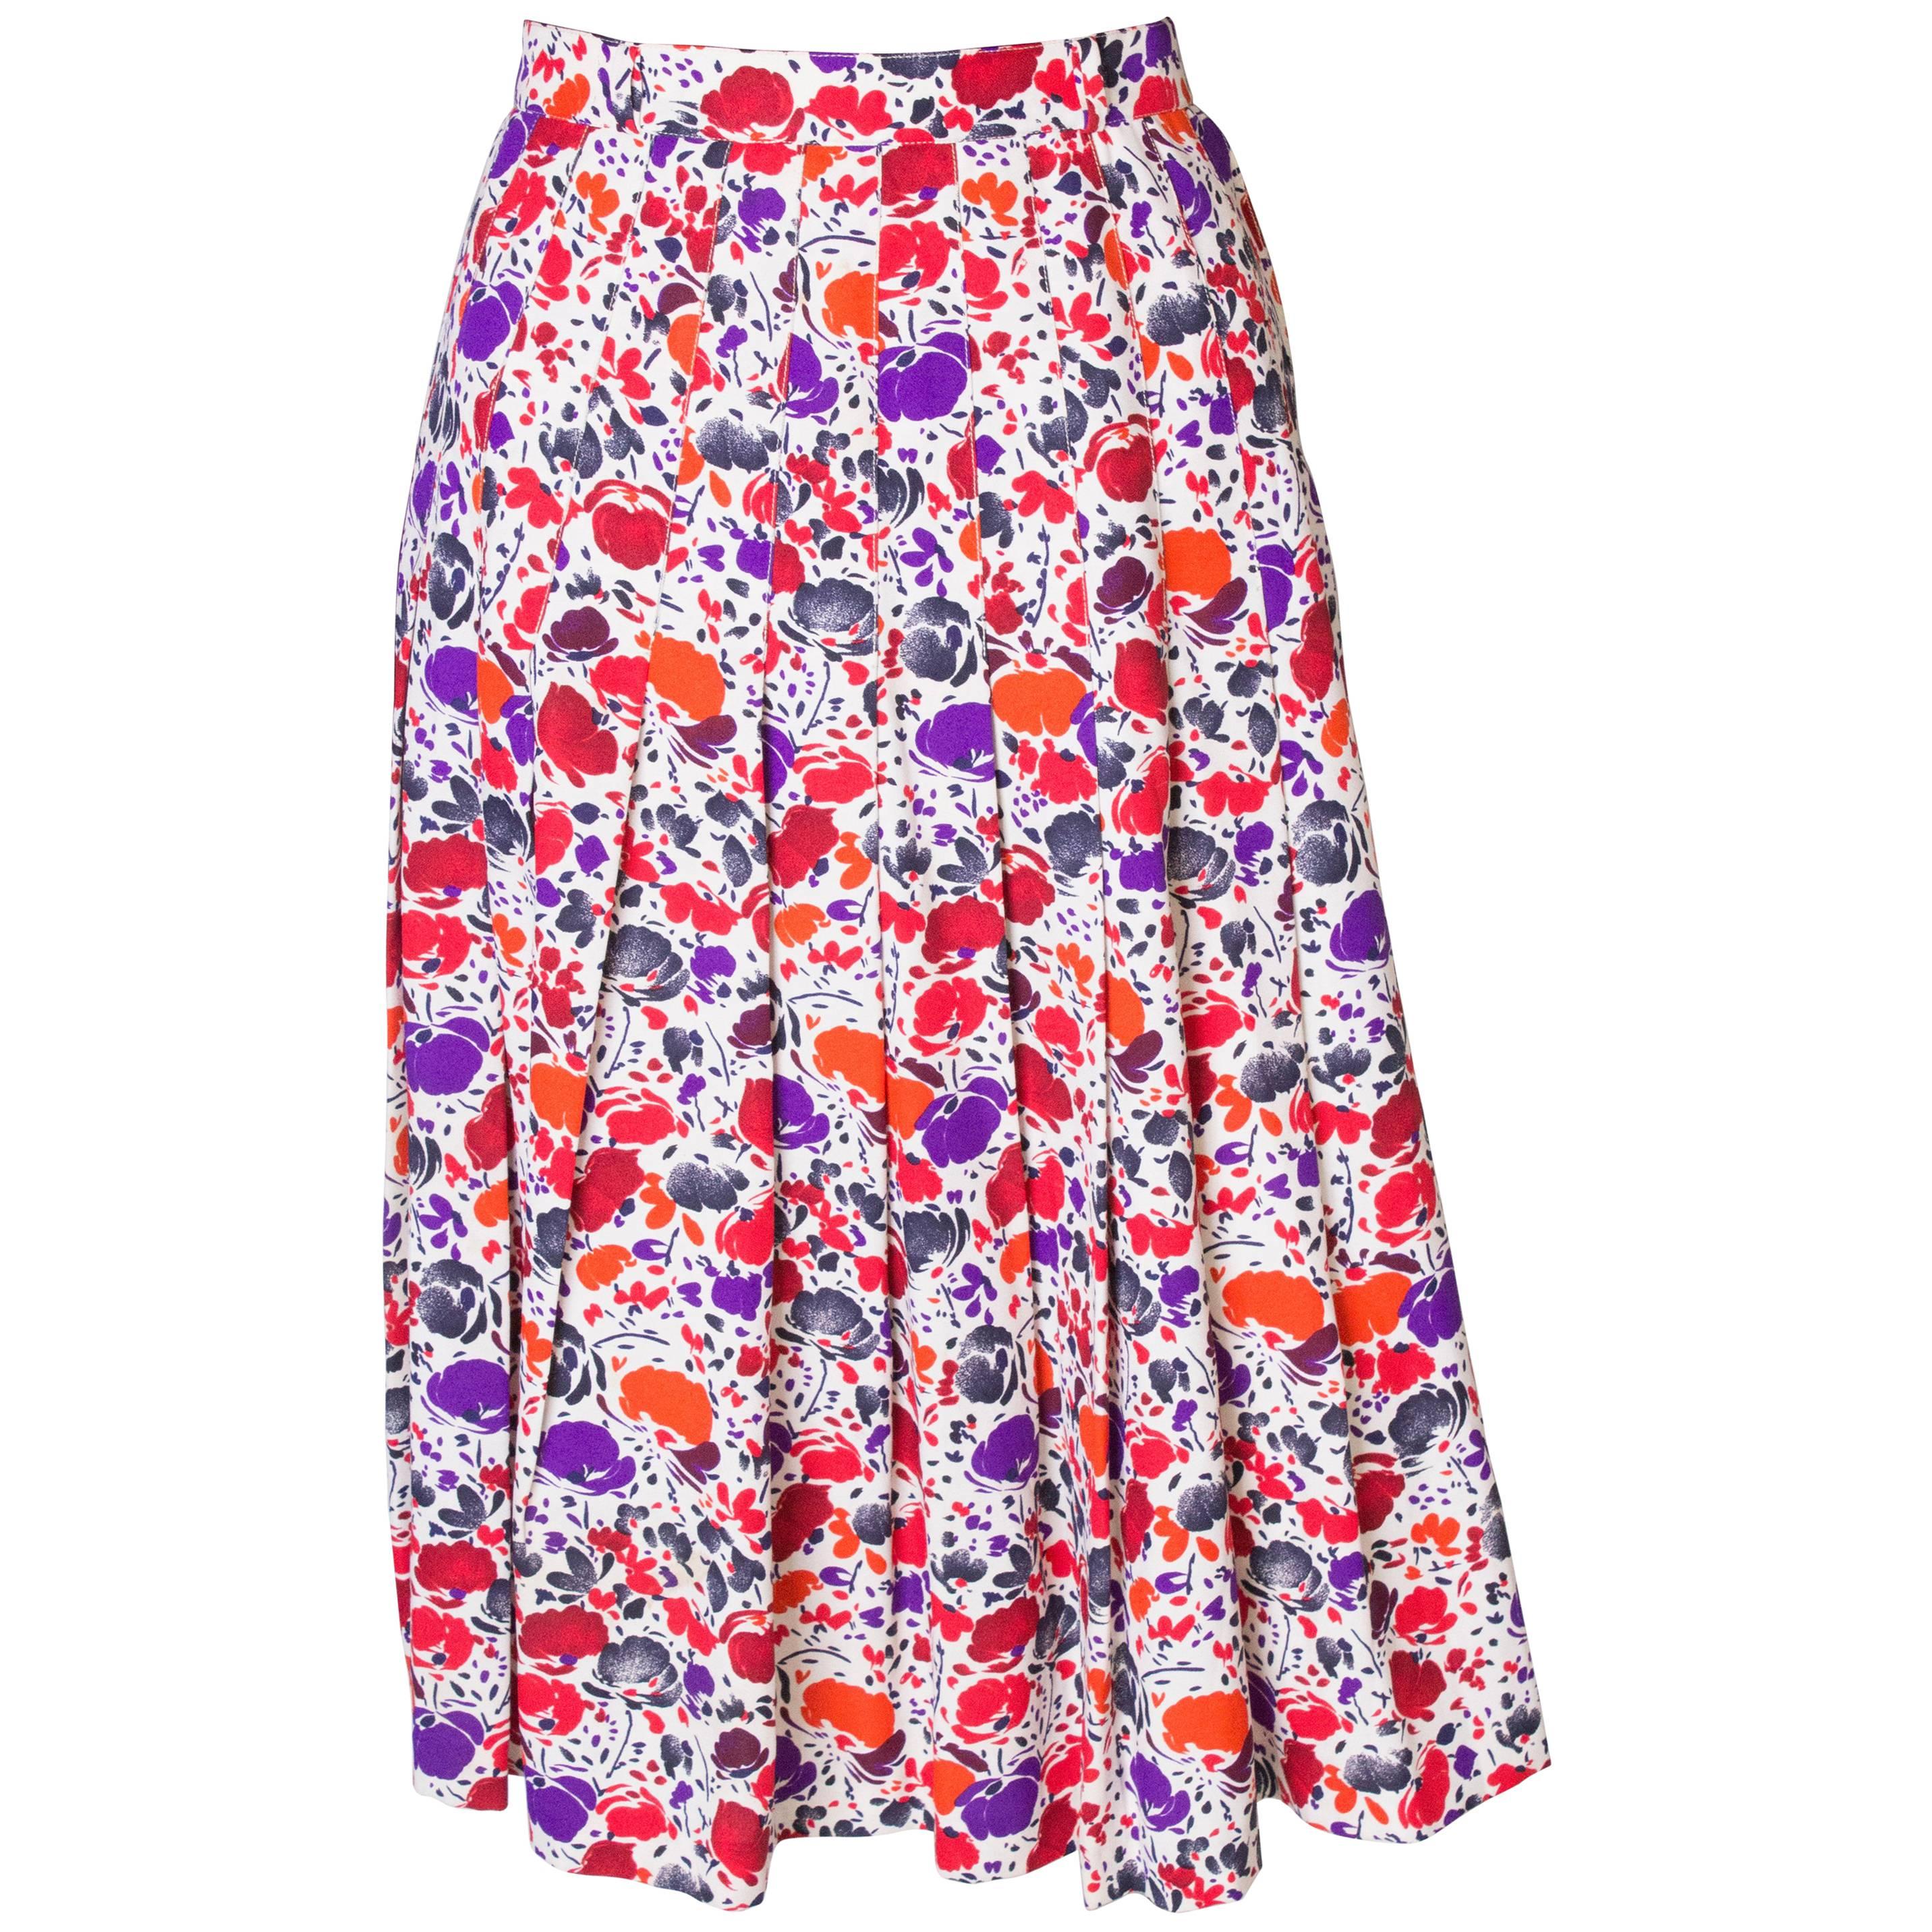 A vintage 1980s floral printed pleated numbered Skirt by Jean Louis Scherer